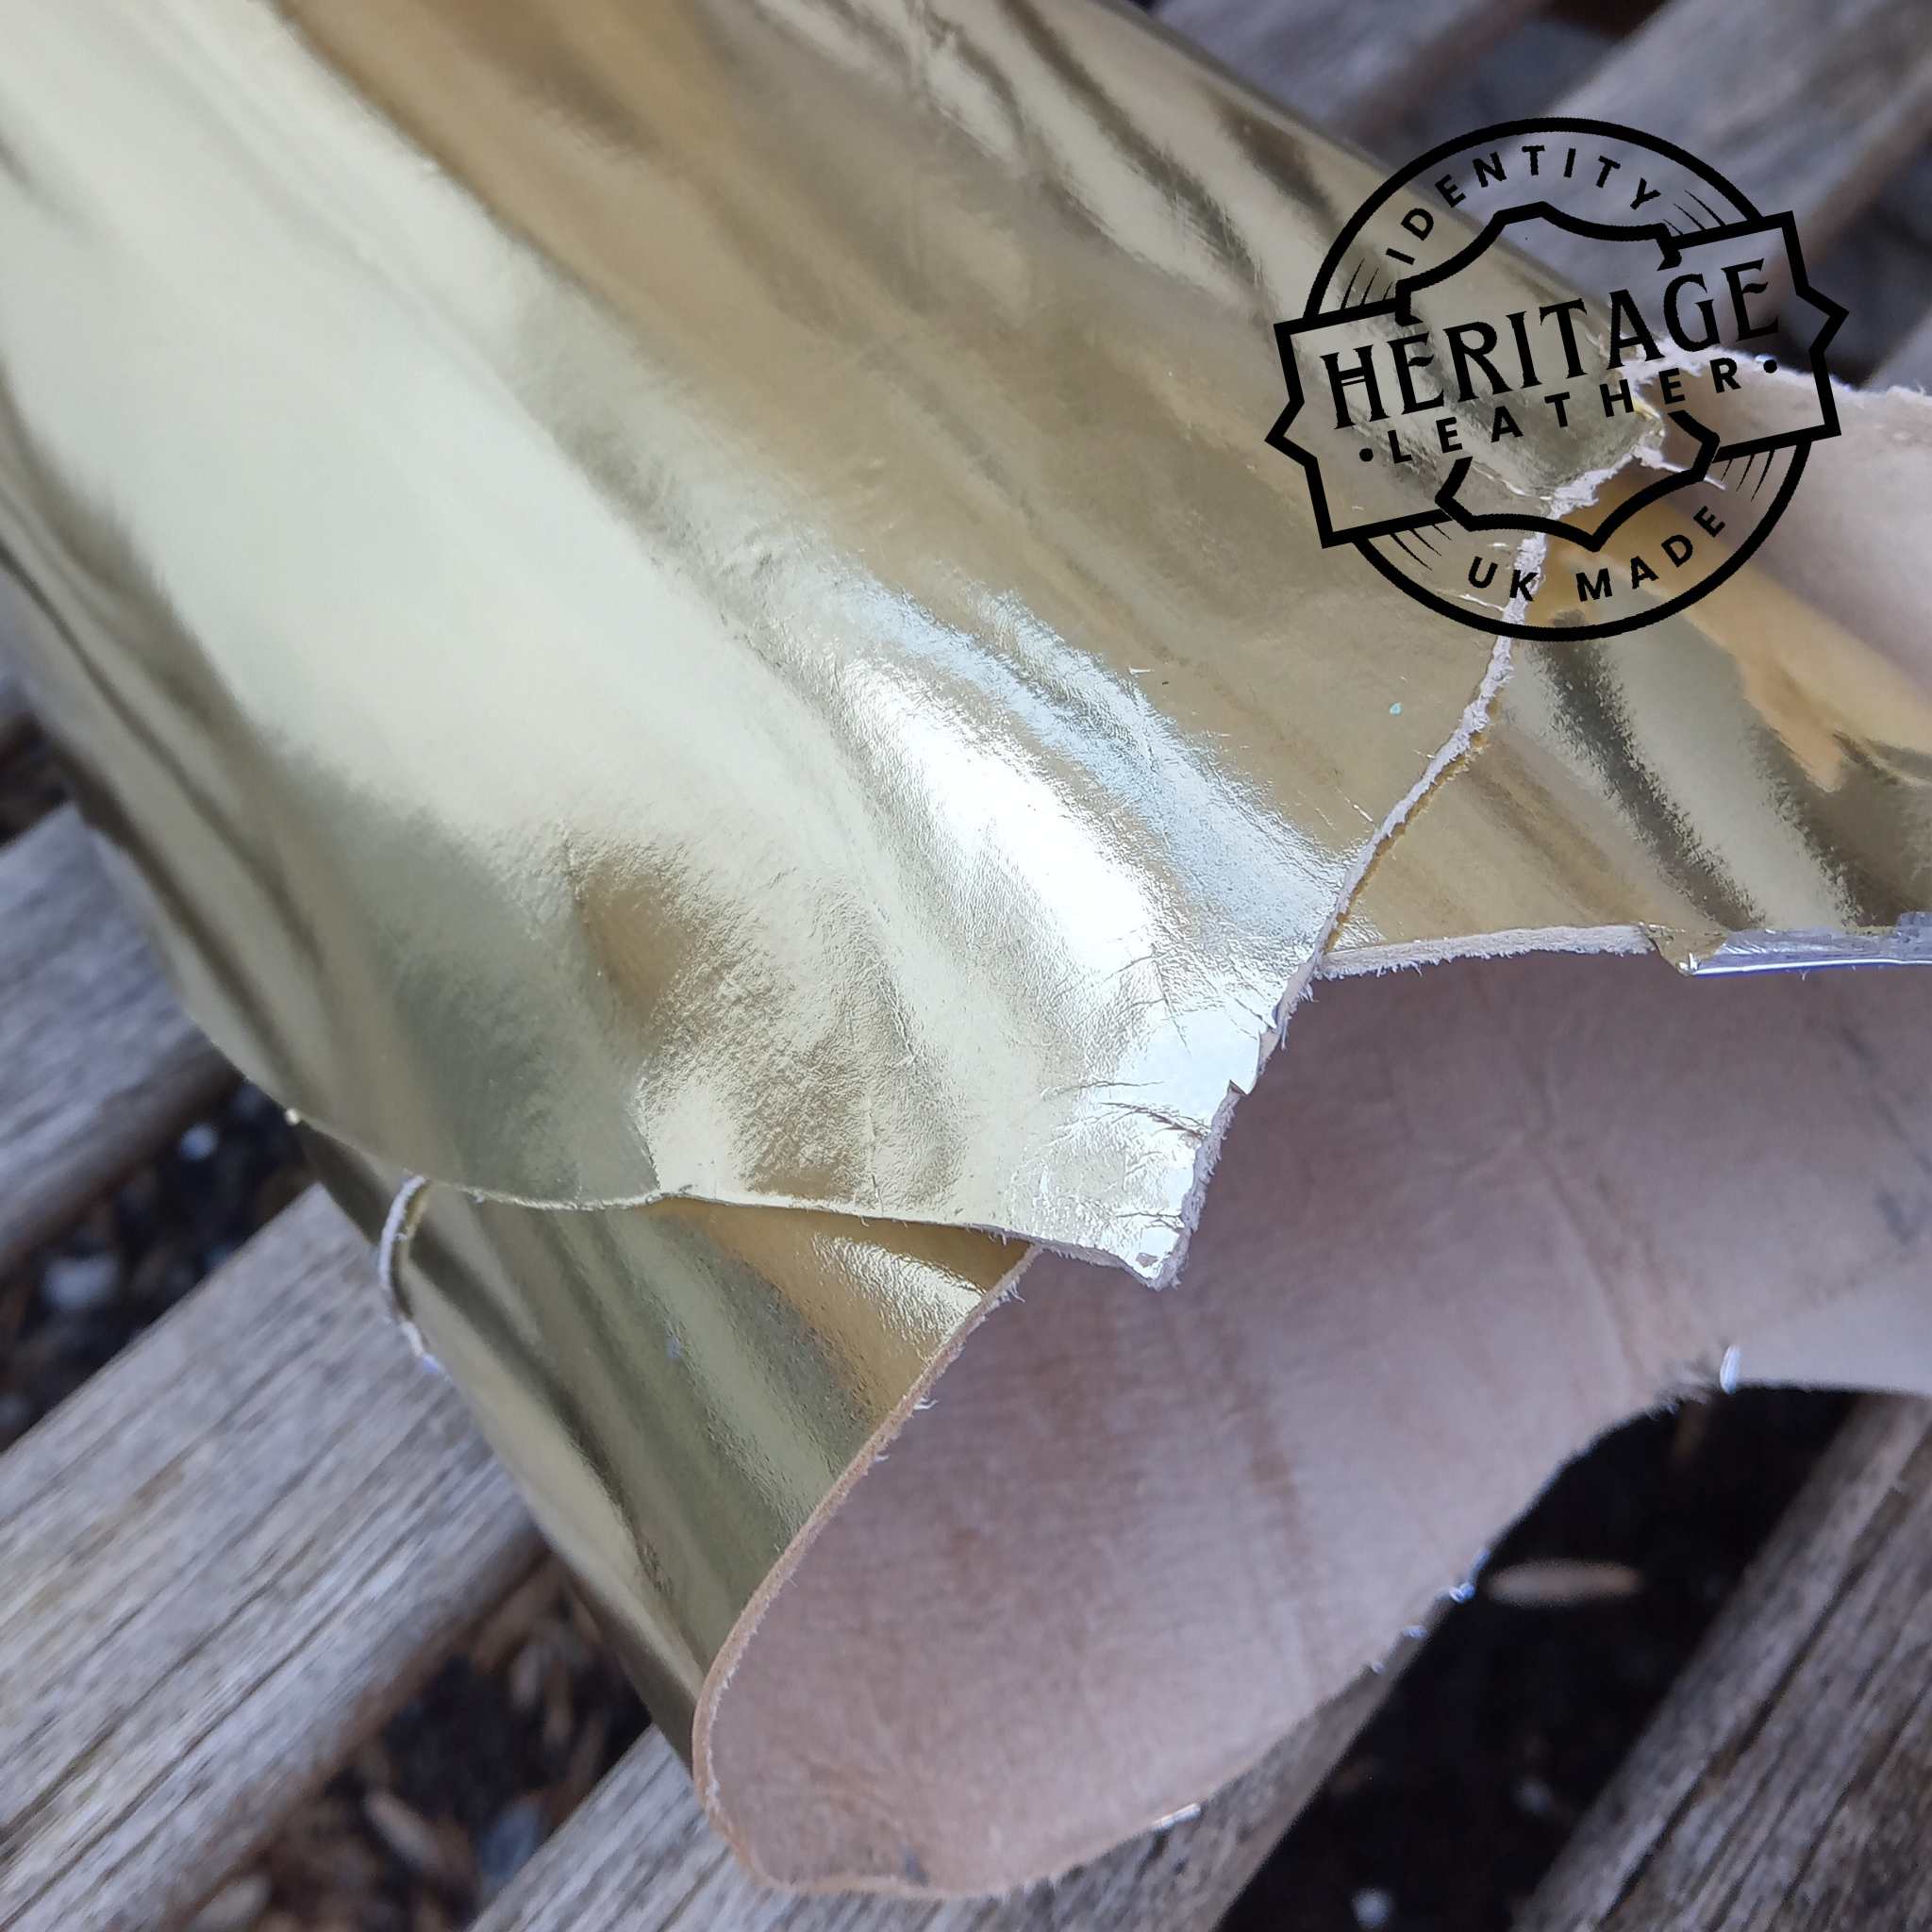 Lightweight veg tanned, heritage UK tanned goat leather with a gold metallic foil.  Ideal for small leathercraft projects, bags, costume and more.